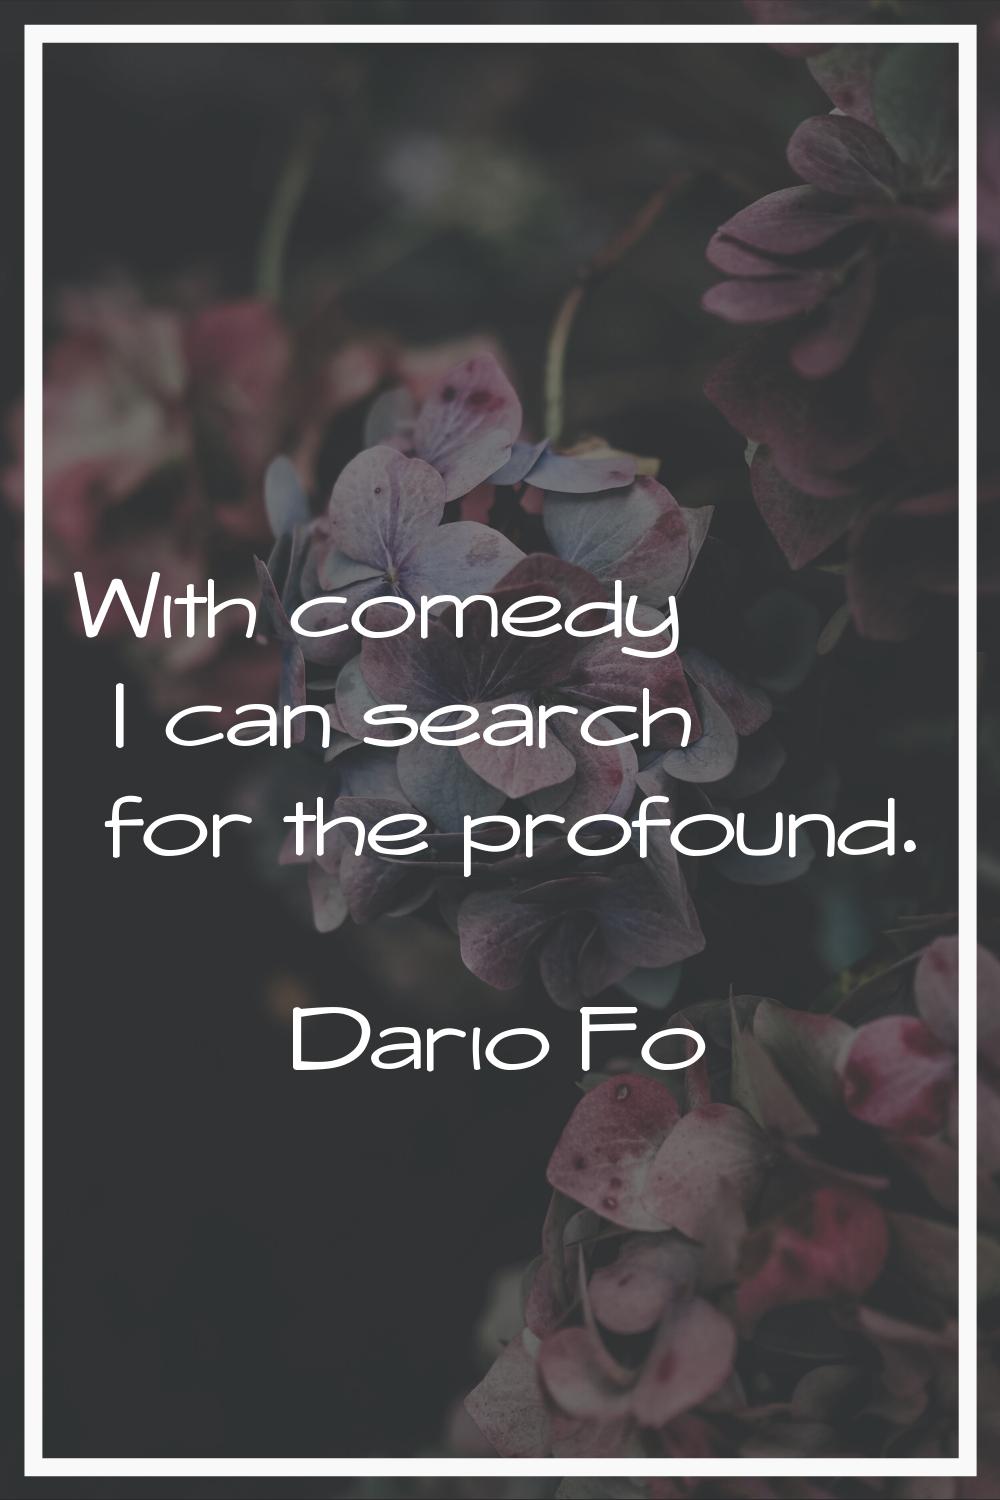 With comedy I can search for the profound.